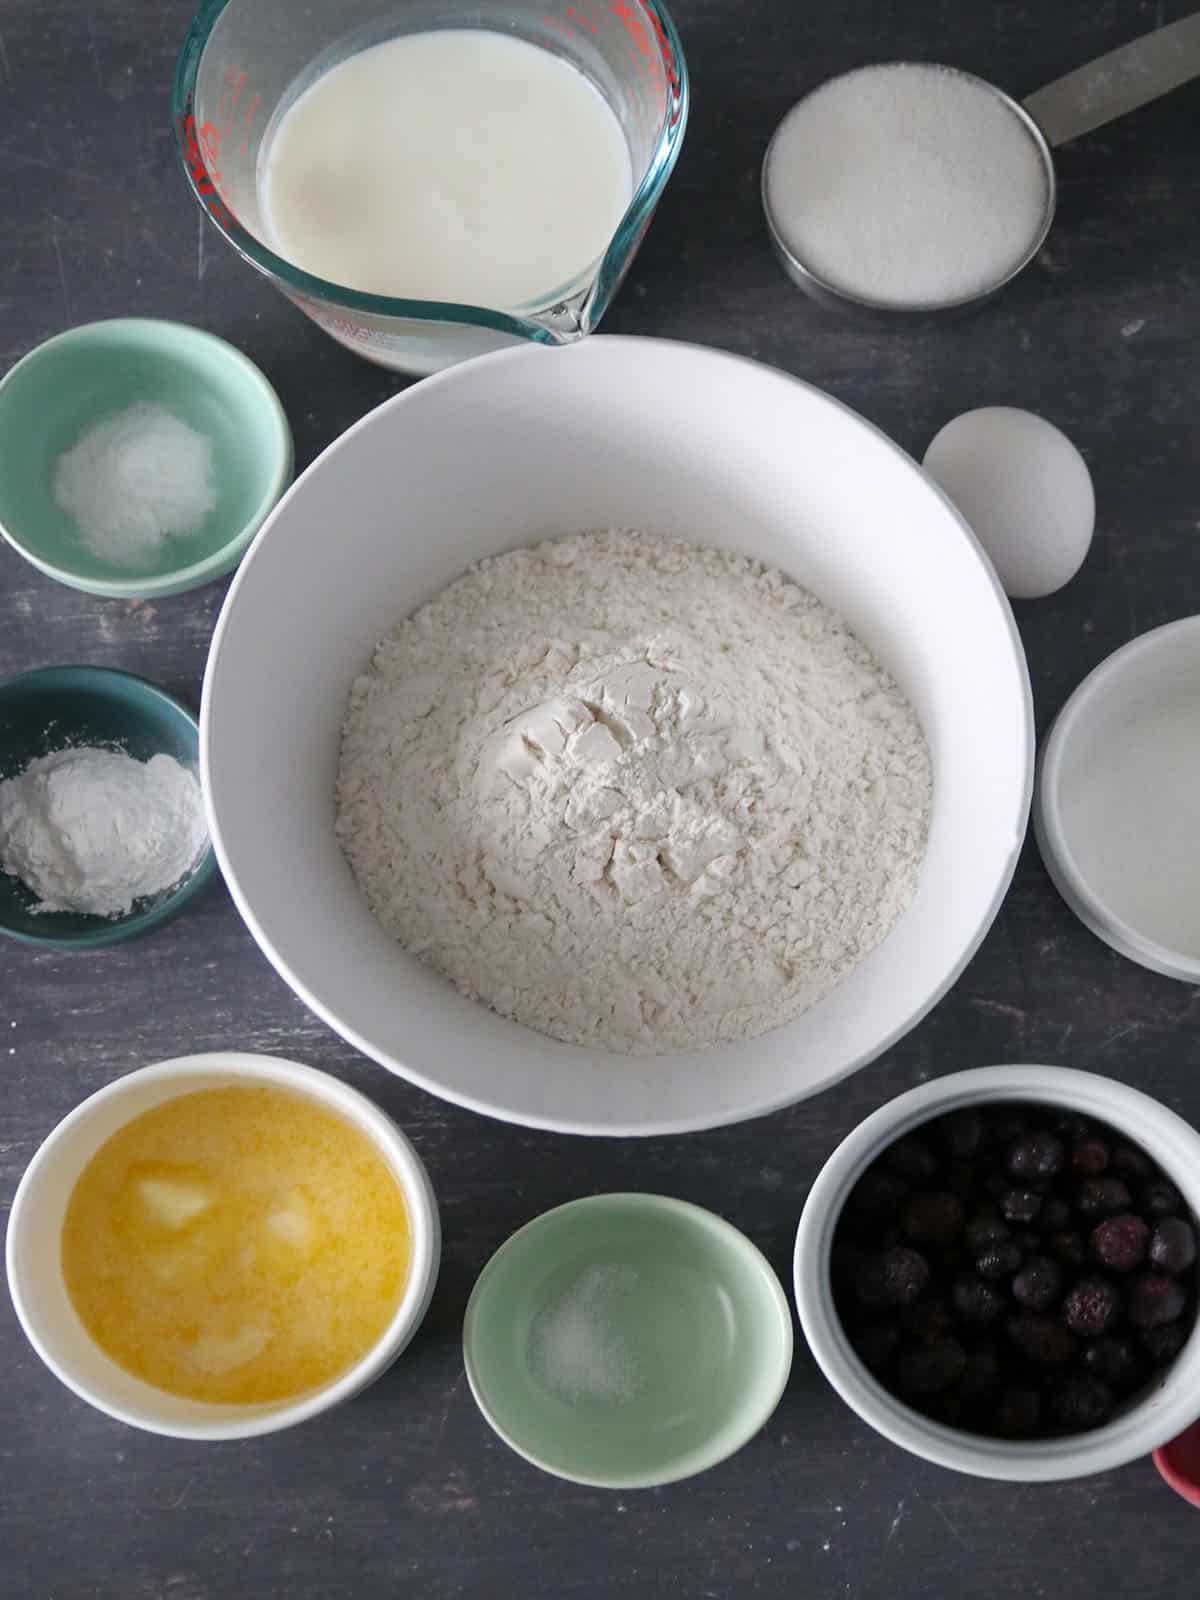 The ingredients for the Easy Blueberry Breakfast Cake.